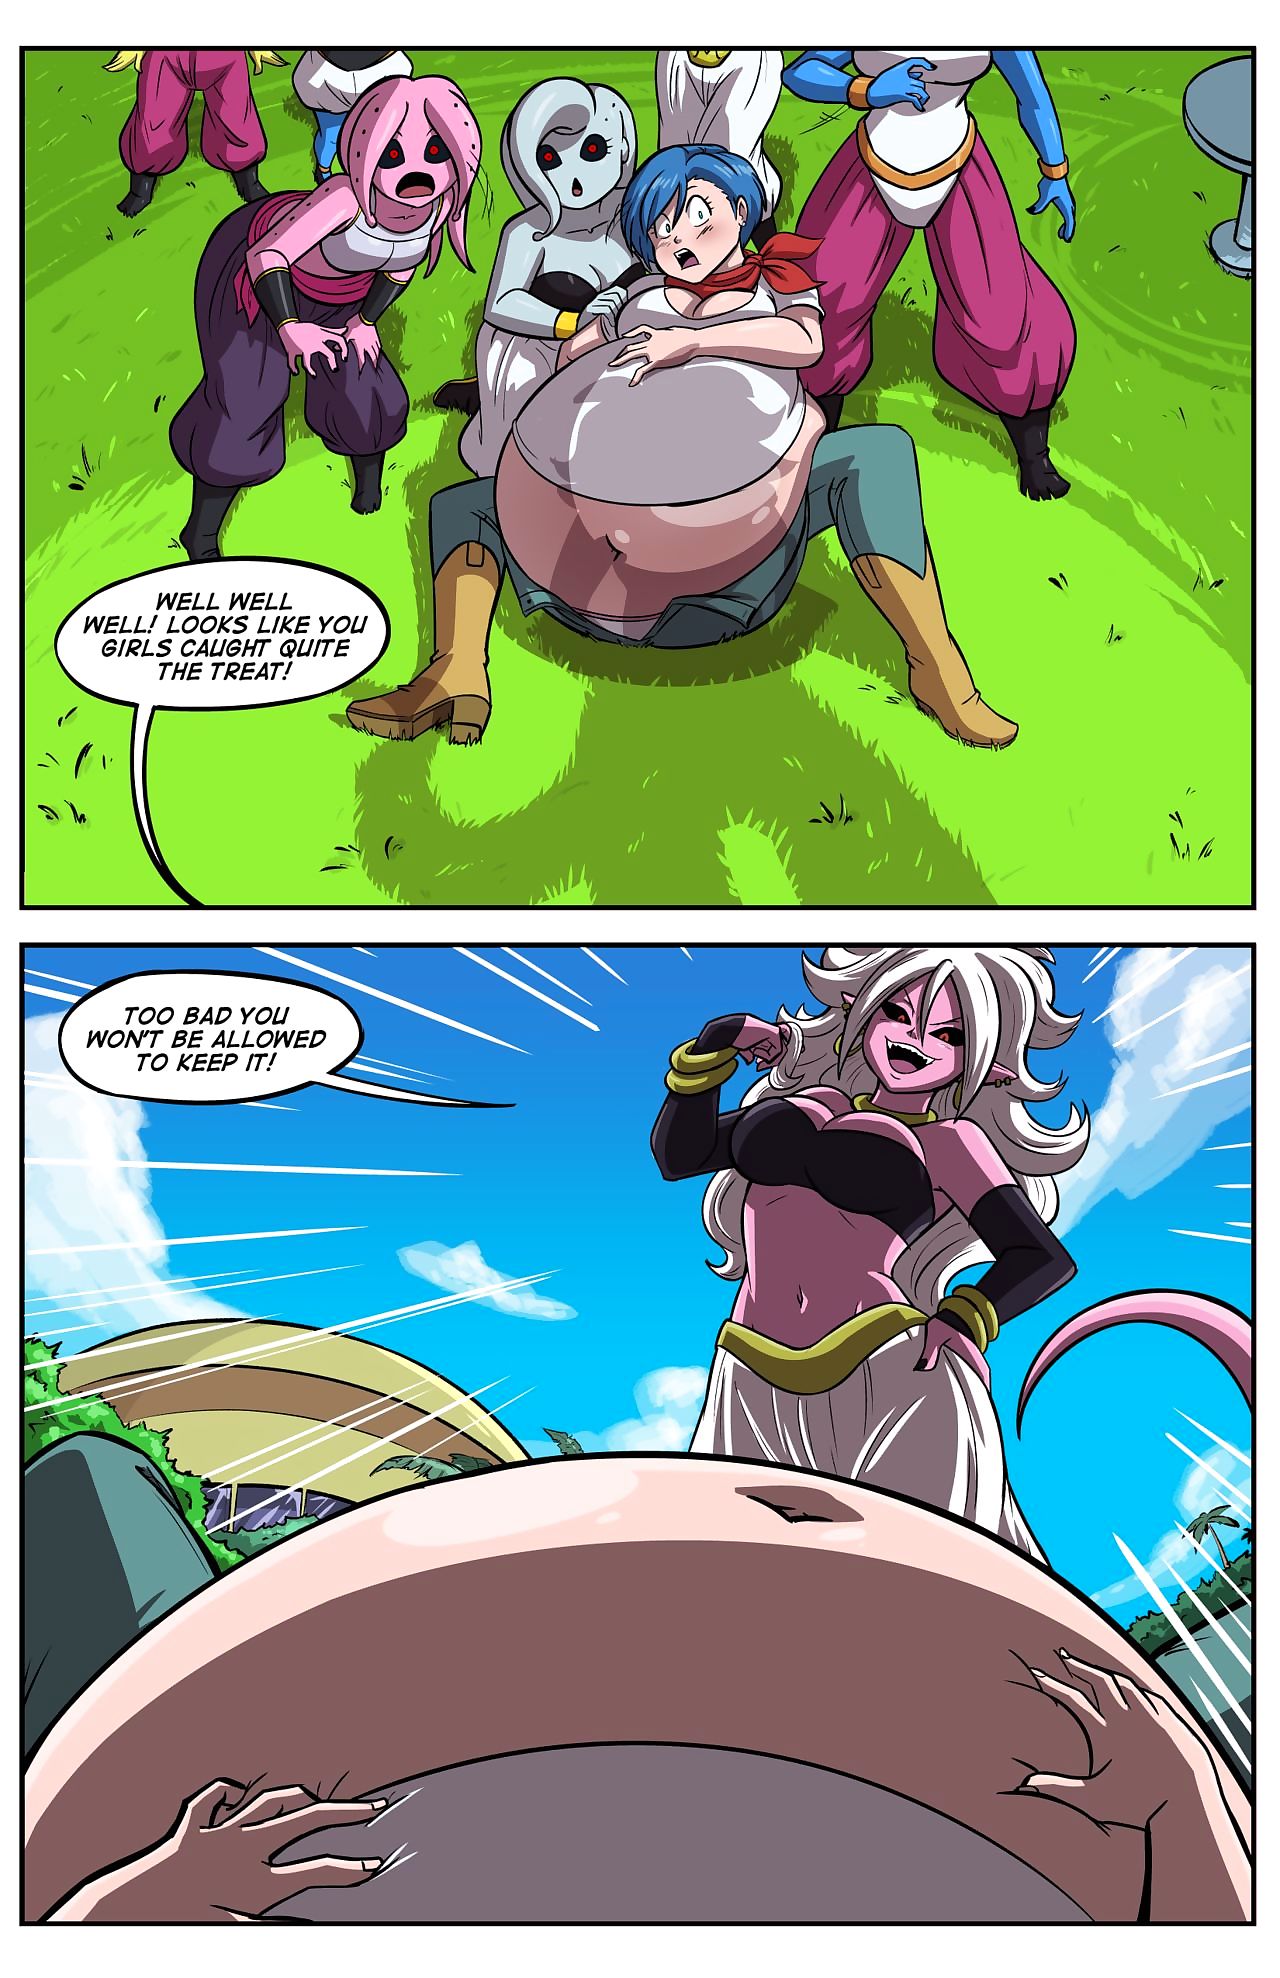 Axel rosered bulma parte 2 page 1